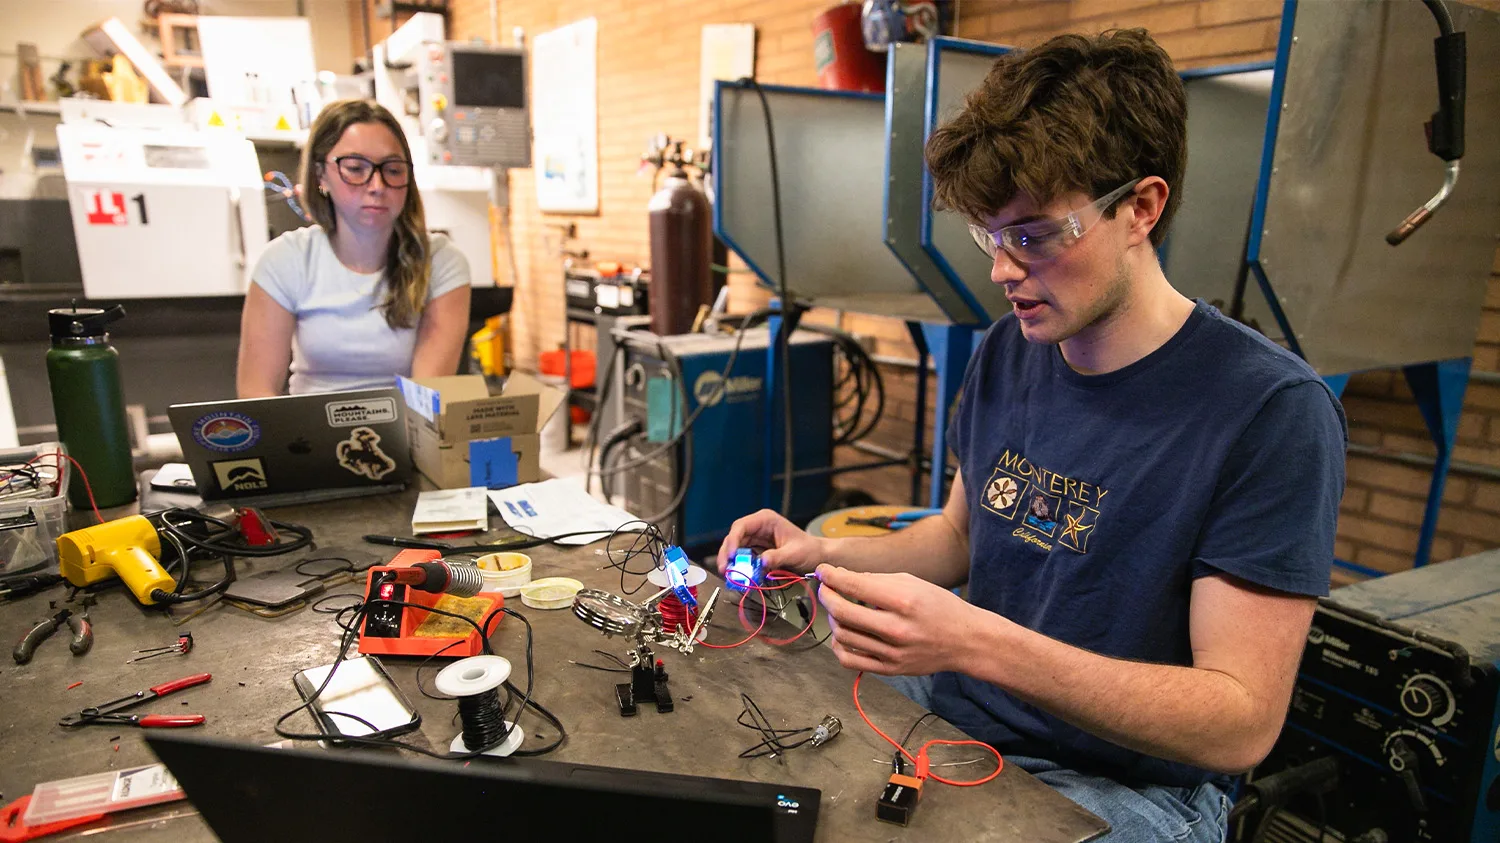 Two students work on a project that involves wires in a lab